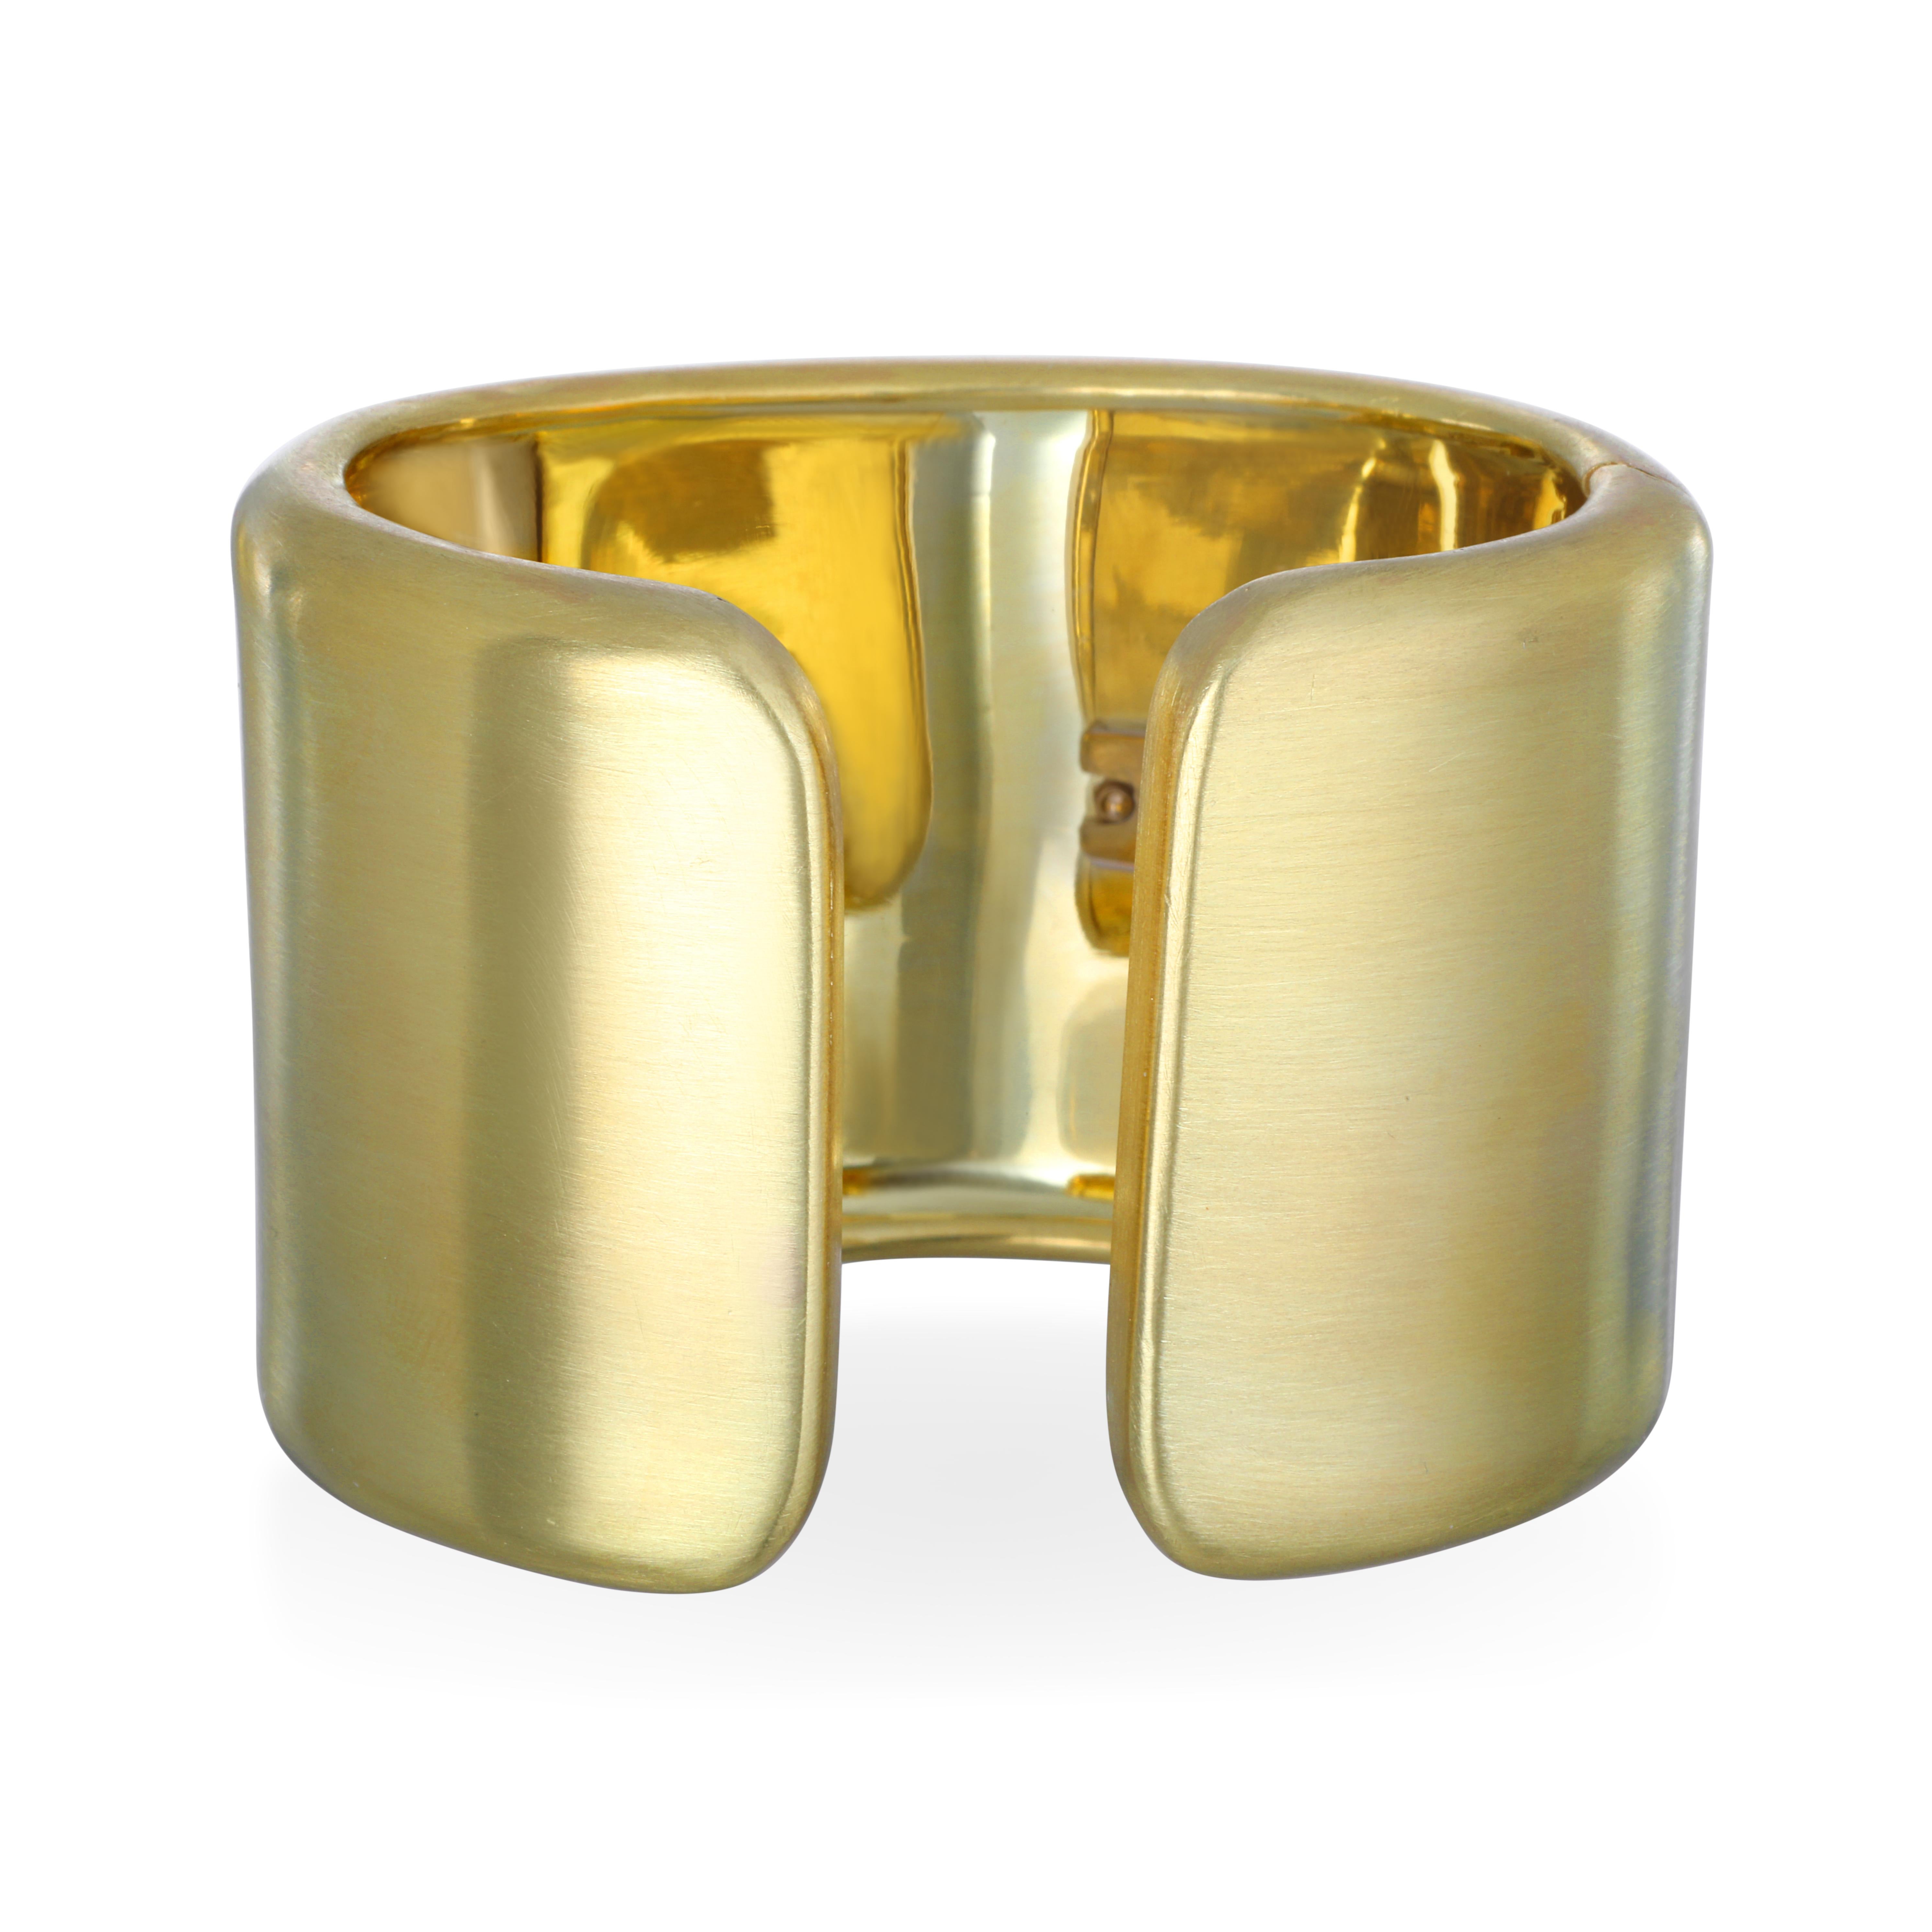 Expert craftsmanship, design, and luxury come together in Faye Kim's handcrafted gold cuff.
Fabricated in solid 18k green gold, with a matte finish, this cuff exudes glamor and sophistication. Hinged for comfort and fit. Also available in a high